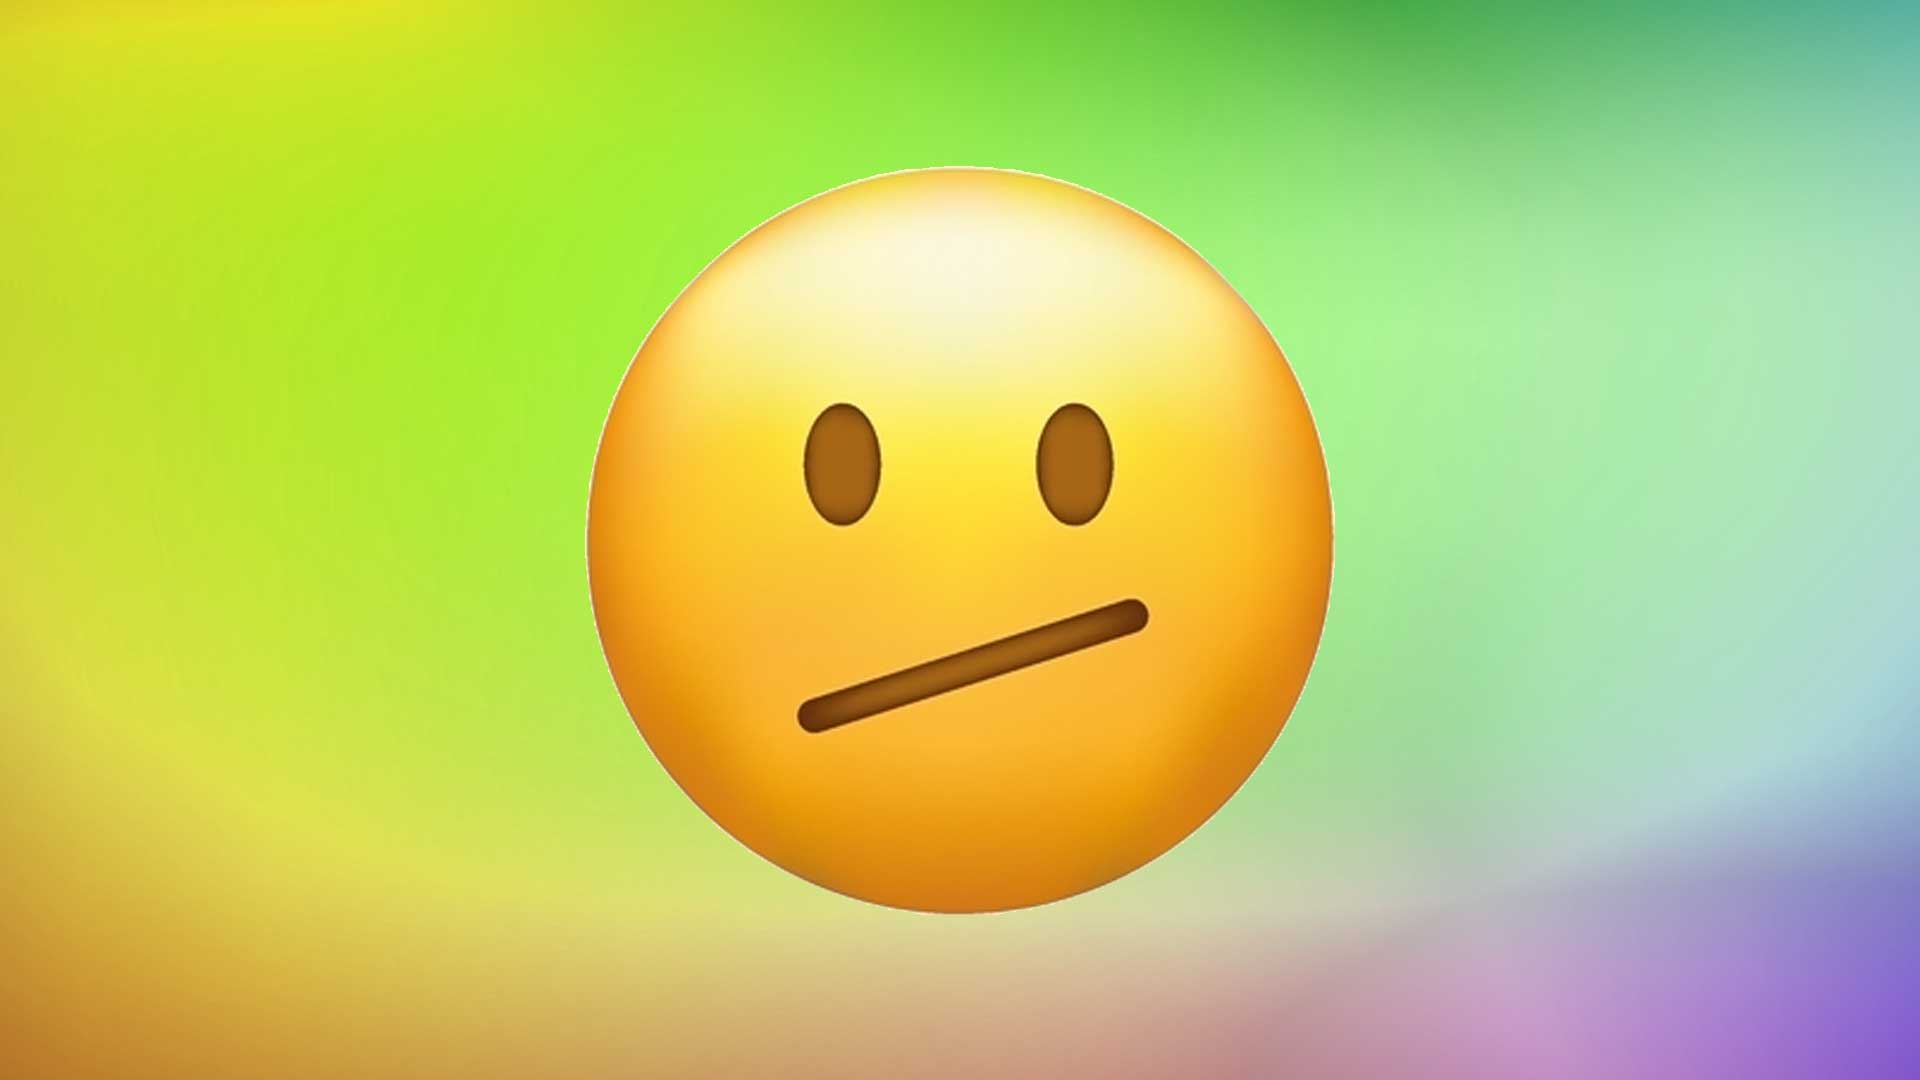 An emoji with a sort of half-smile